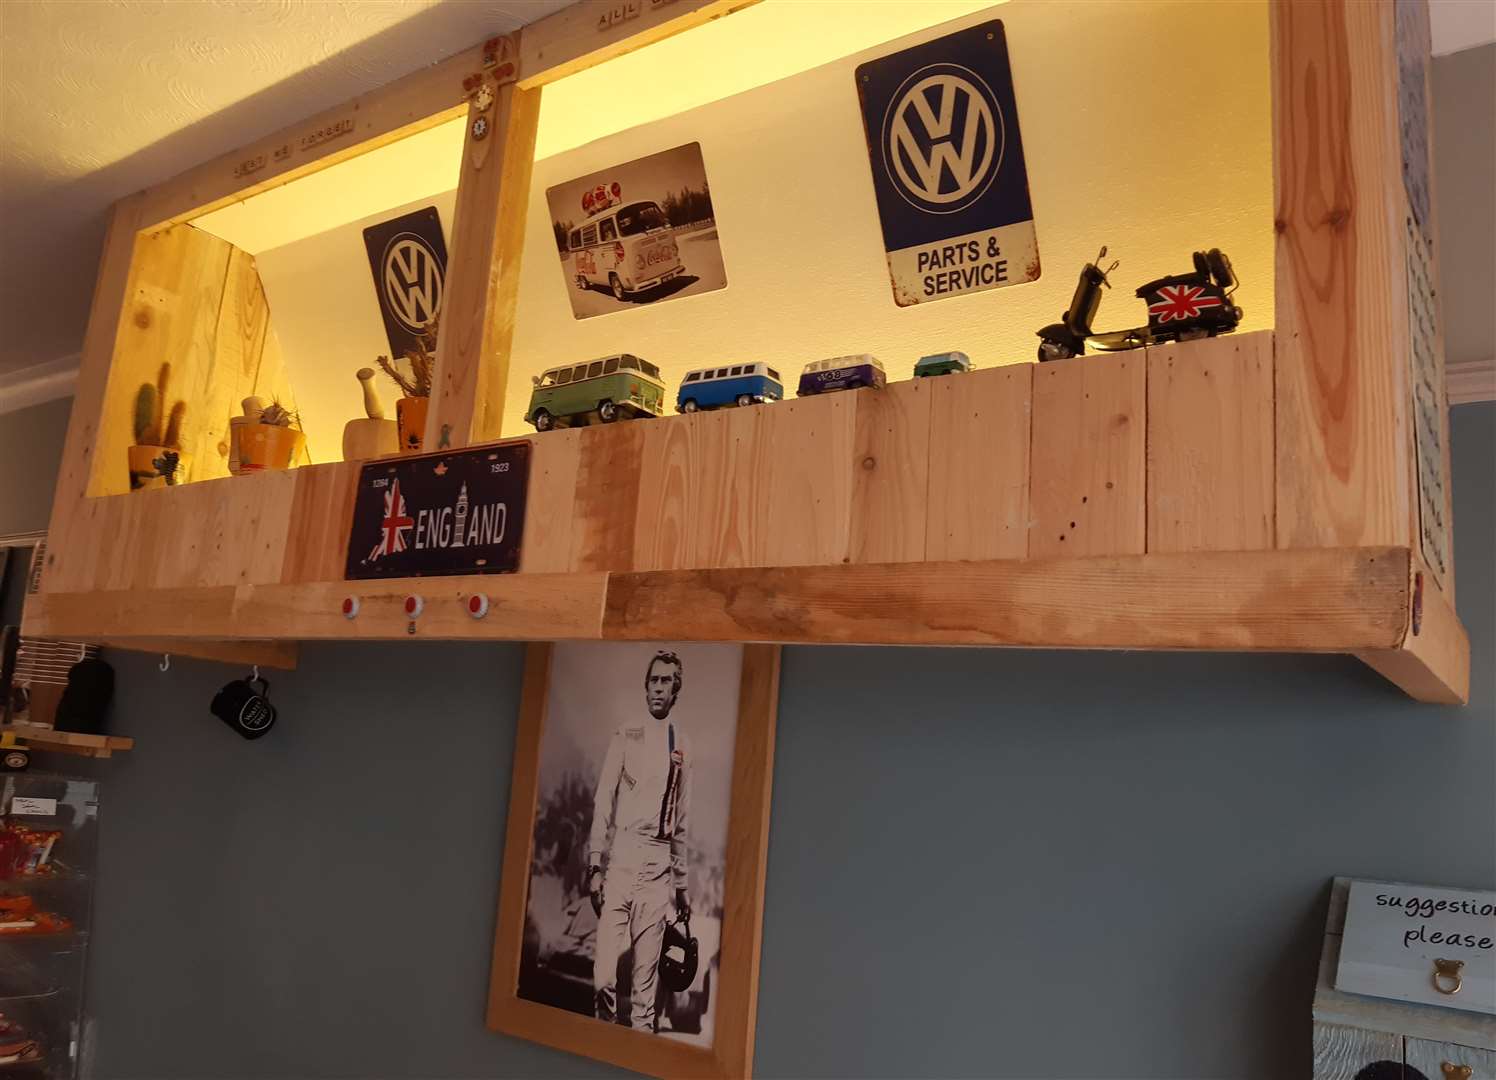 A photo of Steve McQueen in his famous Le Mans film adorns a wall